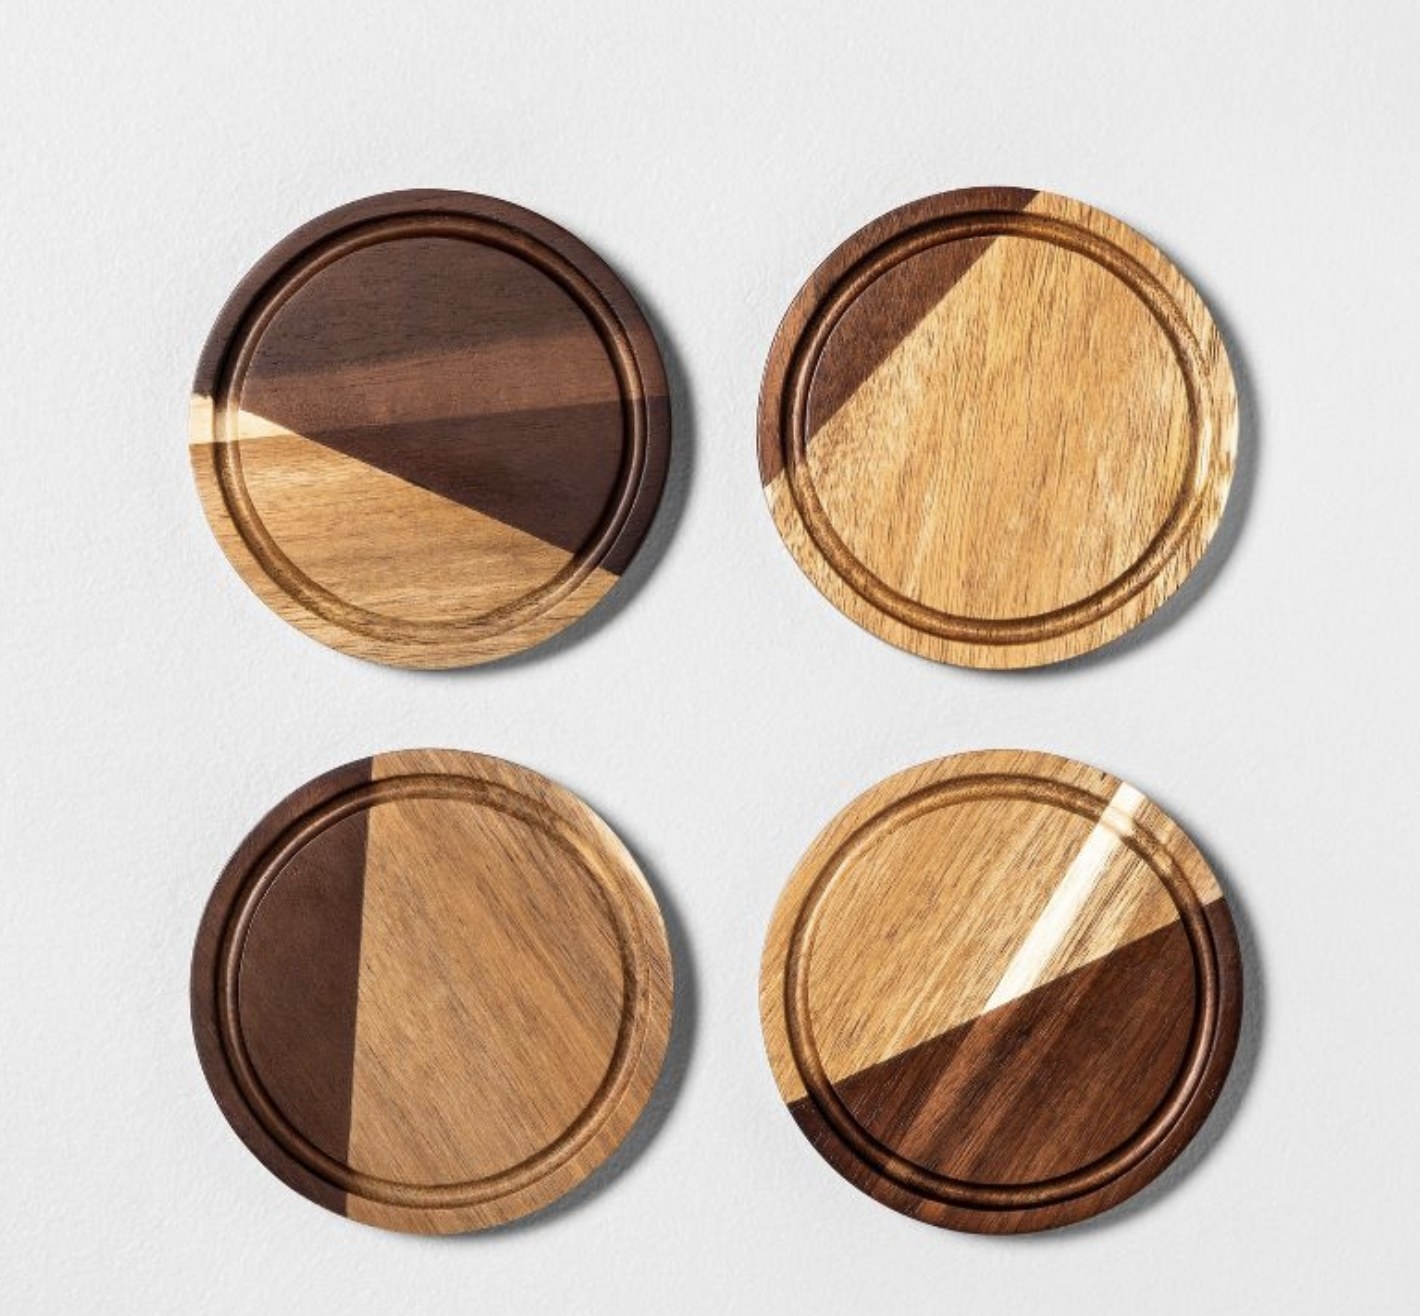 the light and dark brown coasters